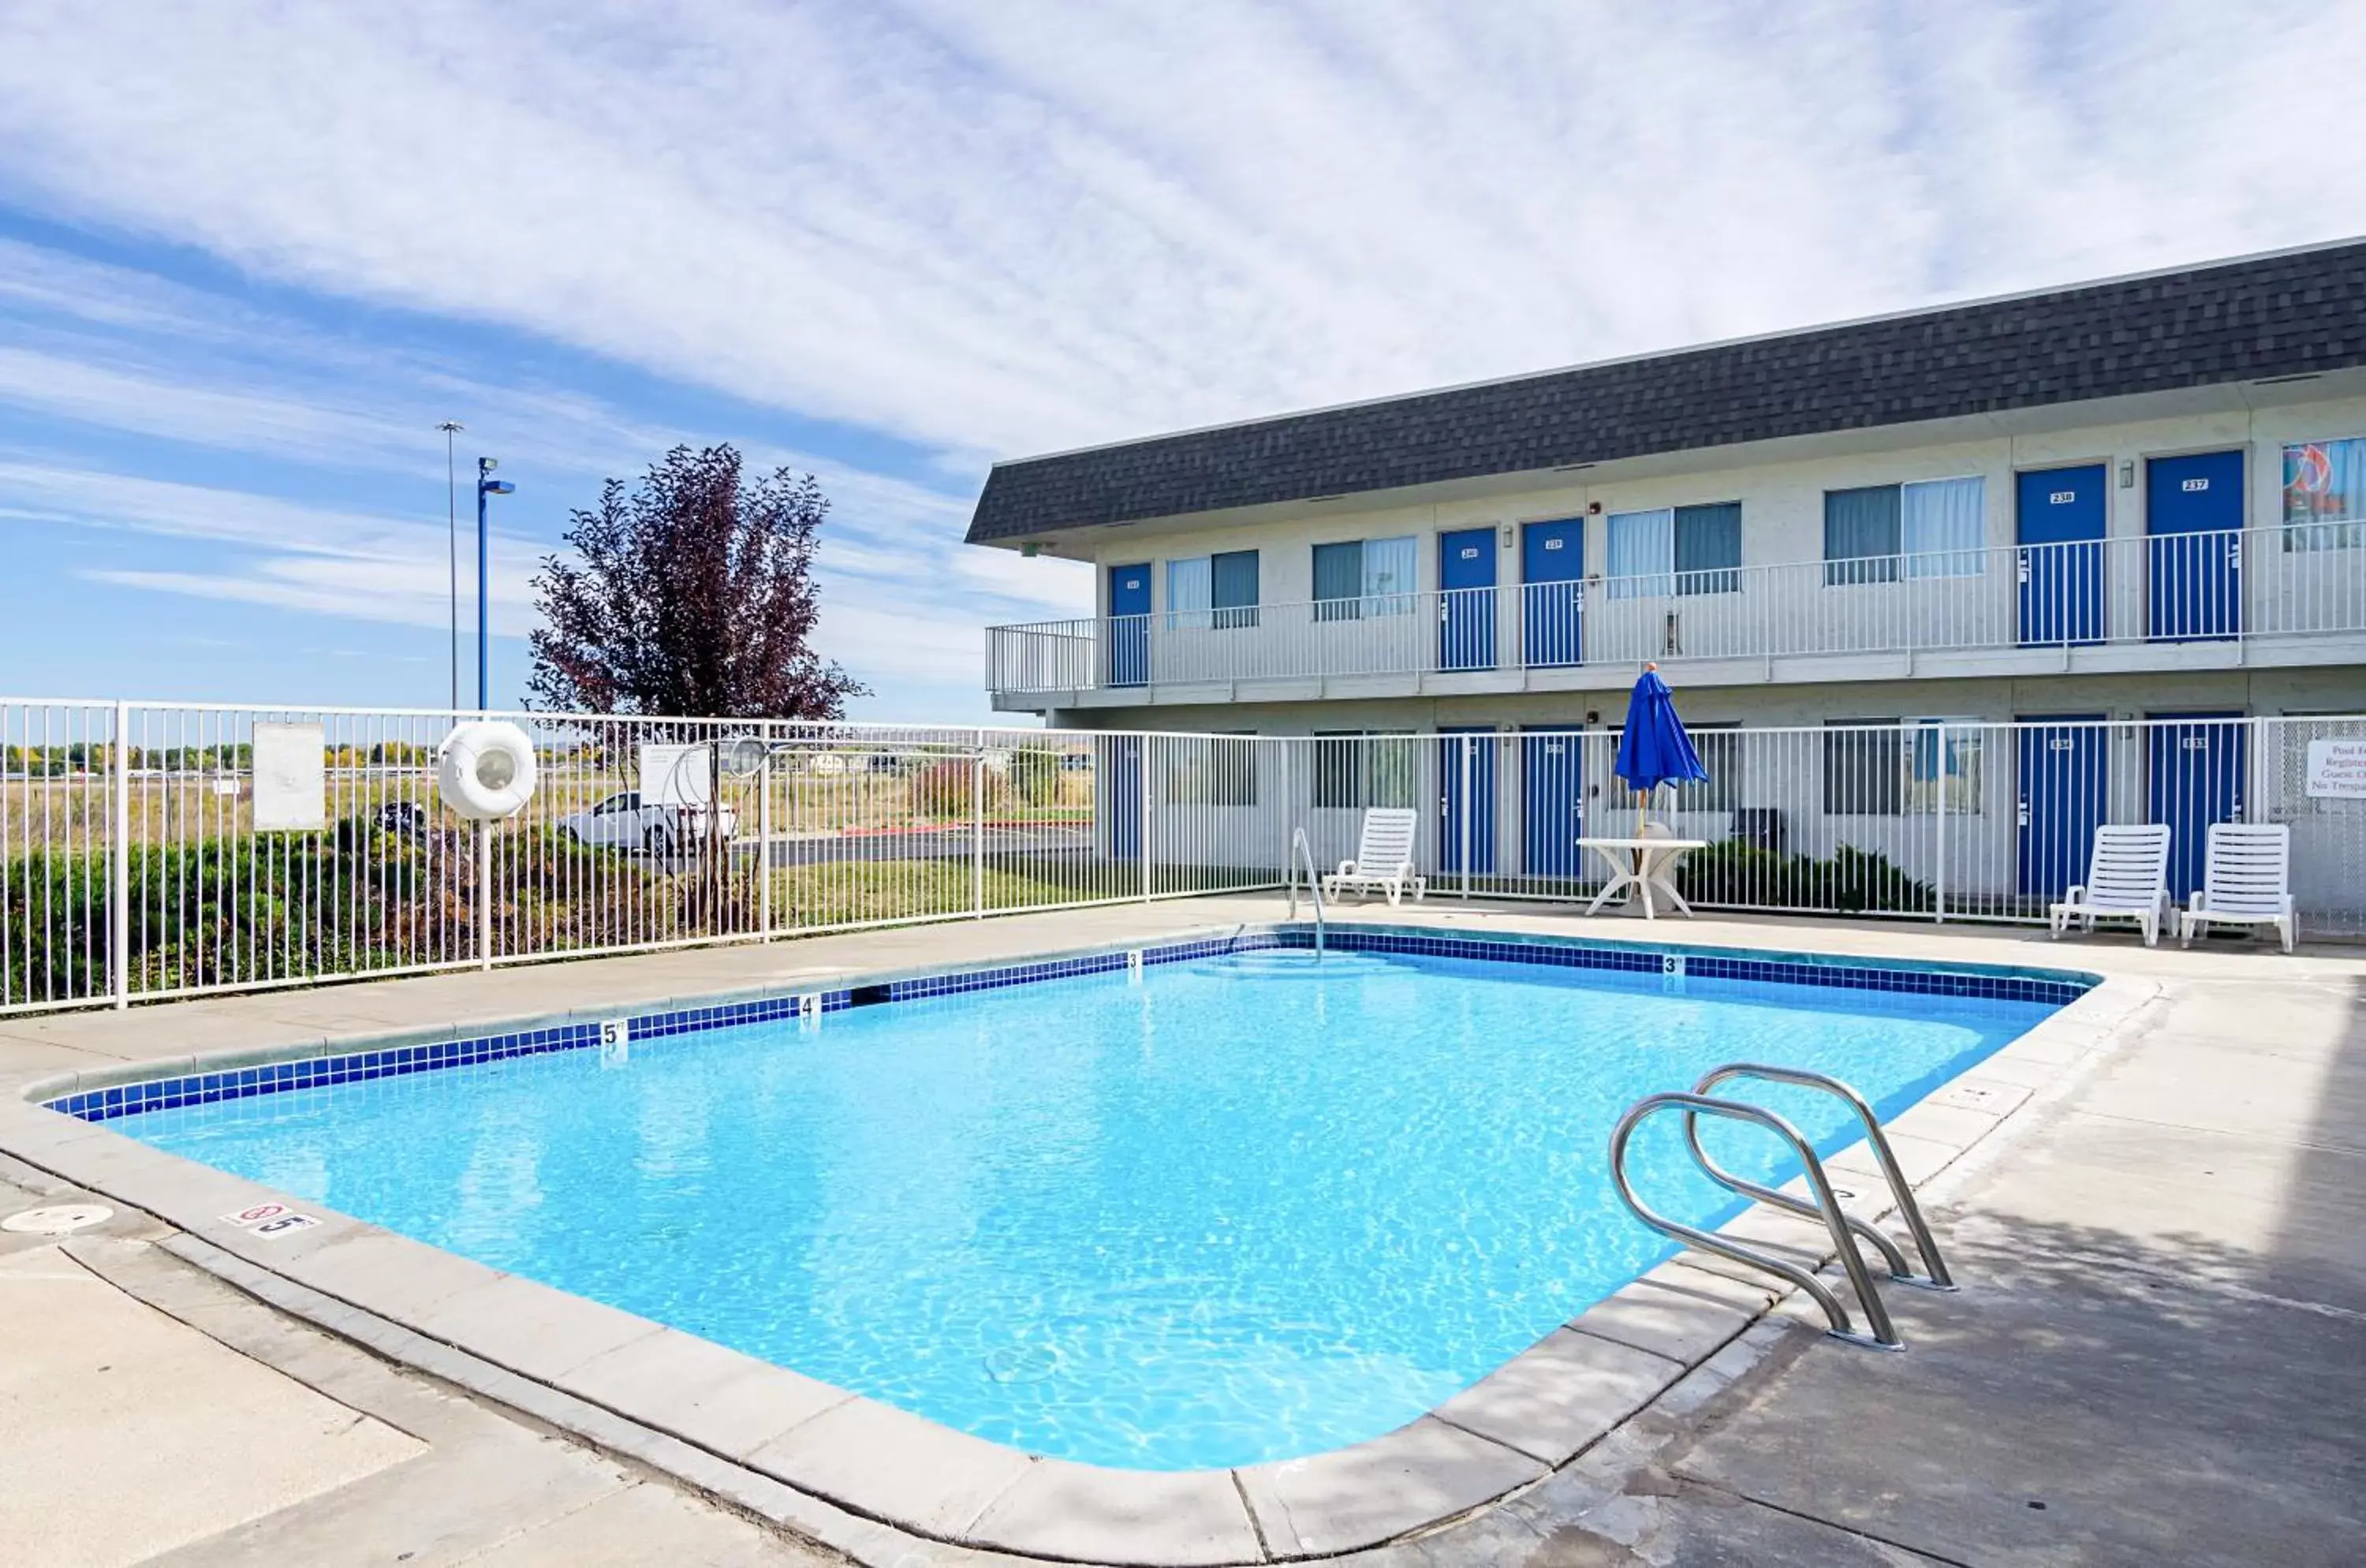 Swimming pool, Property Building in Motel 6-Laramie, WY